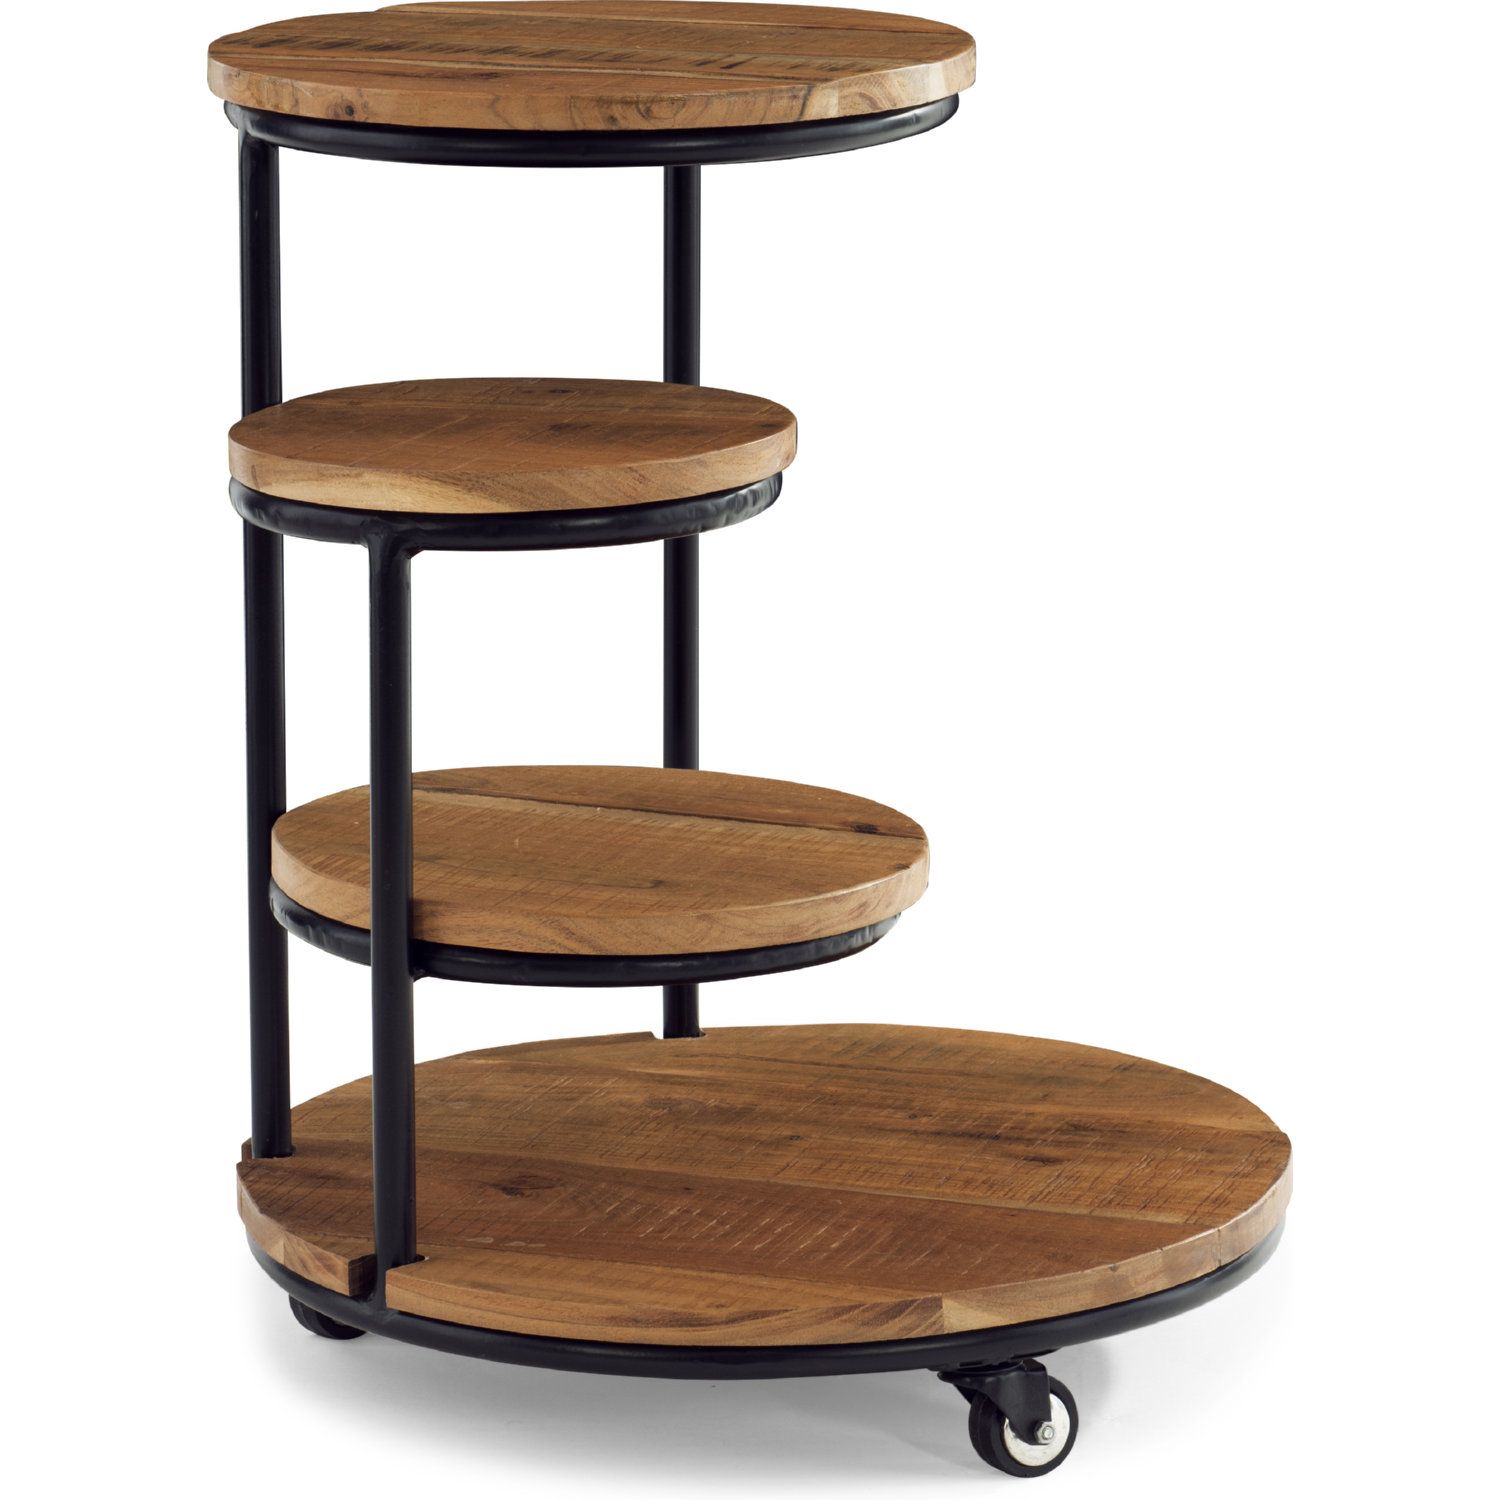 Powell D1247A19Ps Collis 4 Tiered Plant Stand W/ Wheels In Wood & Black For 4 Tier Plant Stands (View 12 of 15)